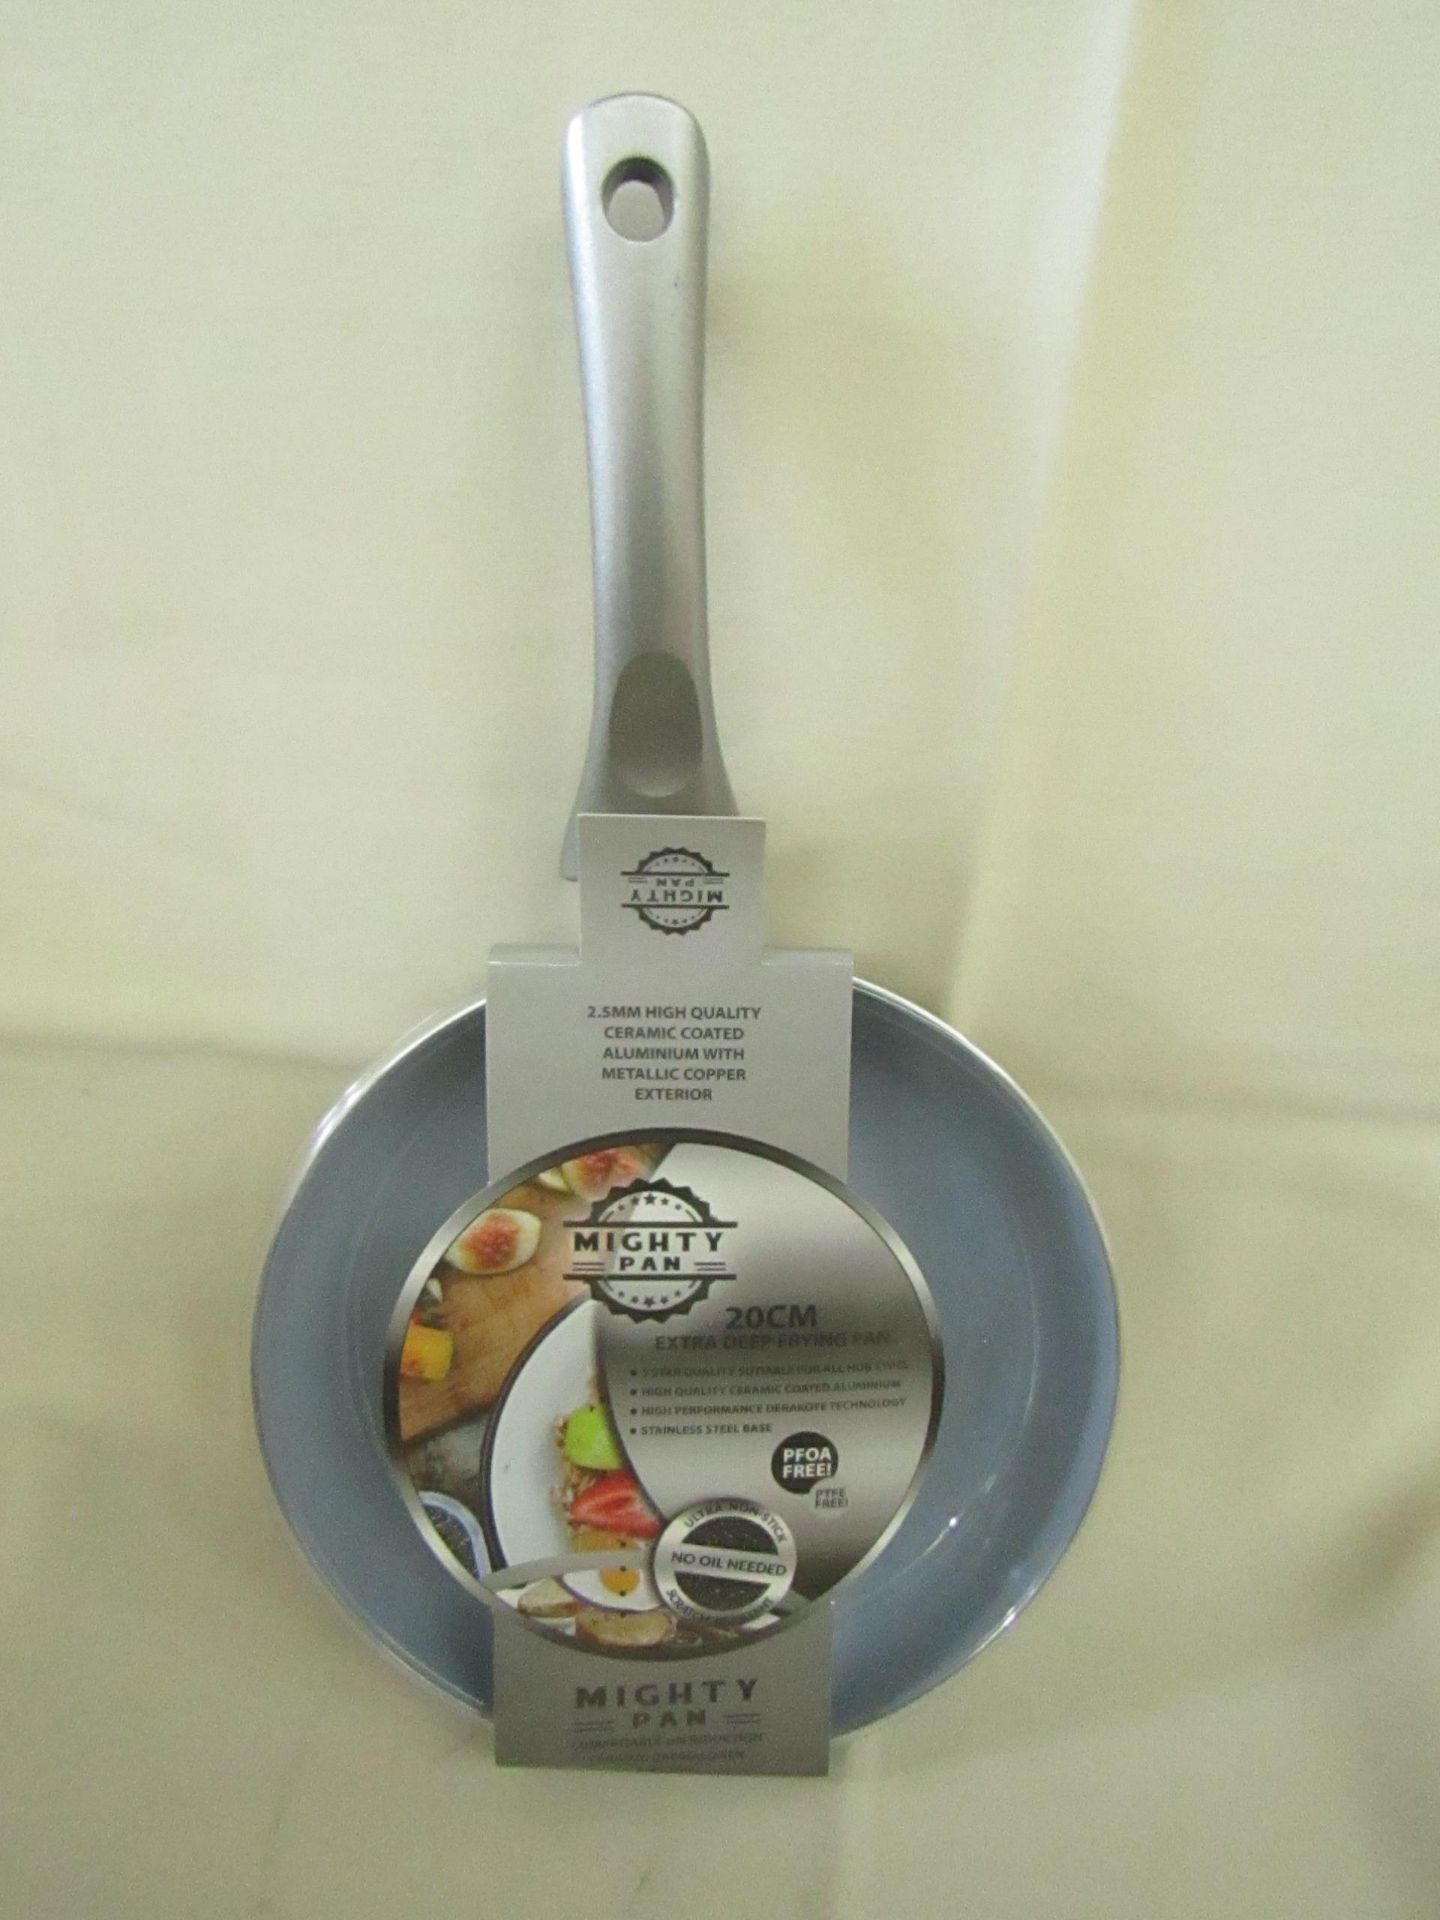 Mighty Pan - Extra Deep Non-Stick Scratch Resistant - Silver ( 20cm ) Frying Pan - New & Boxed.